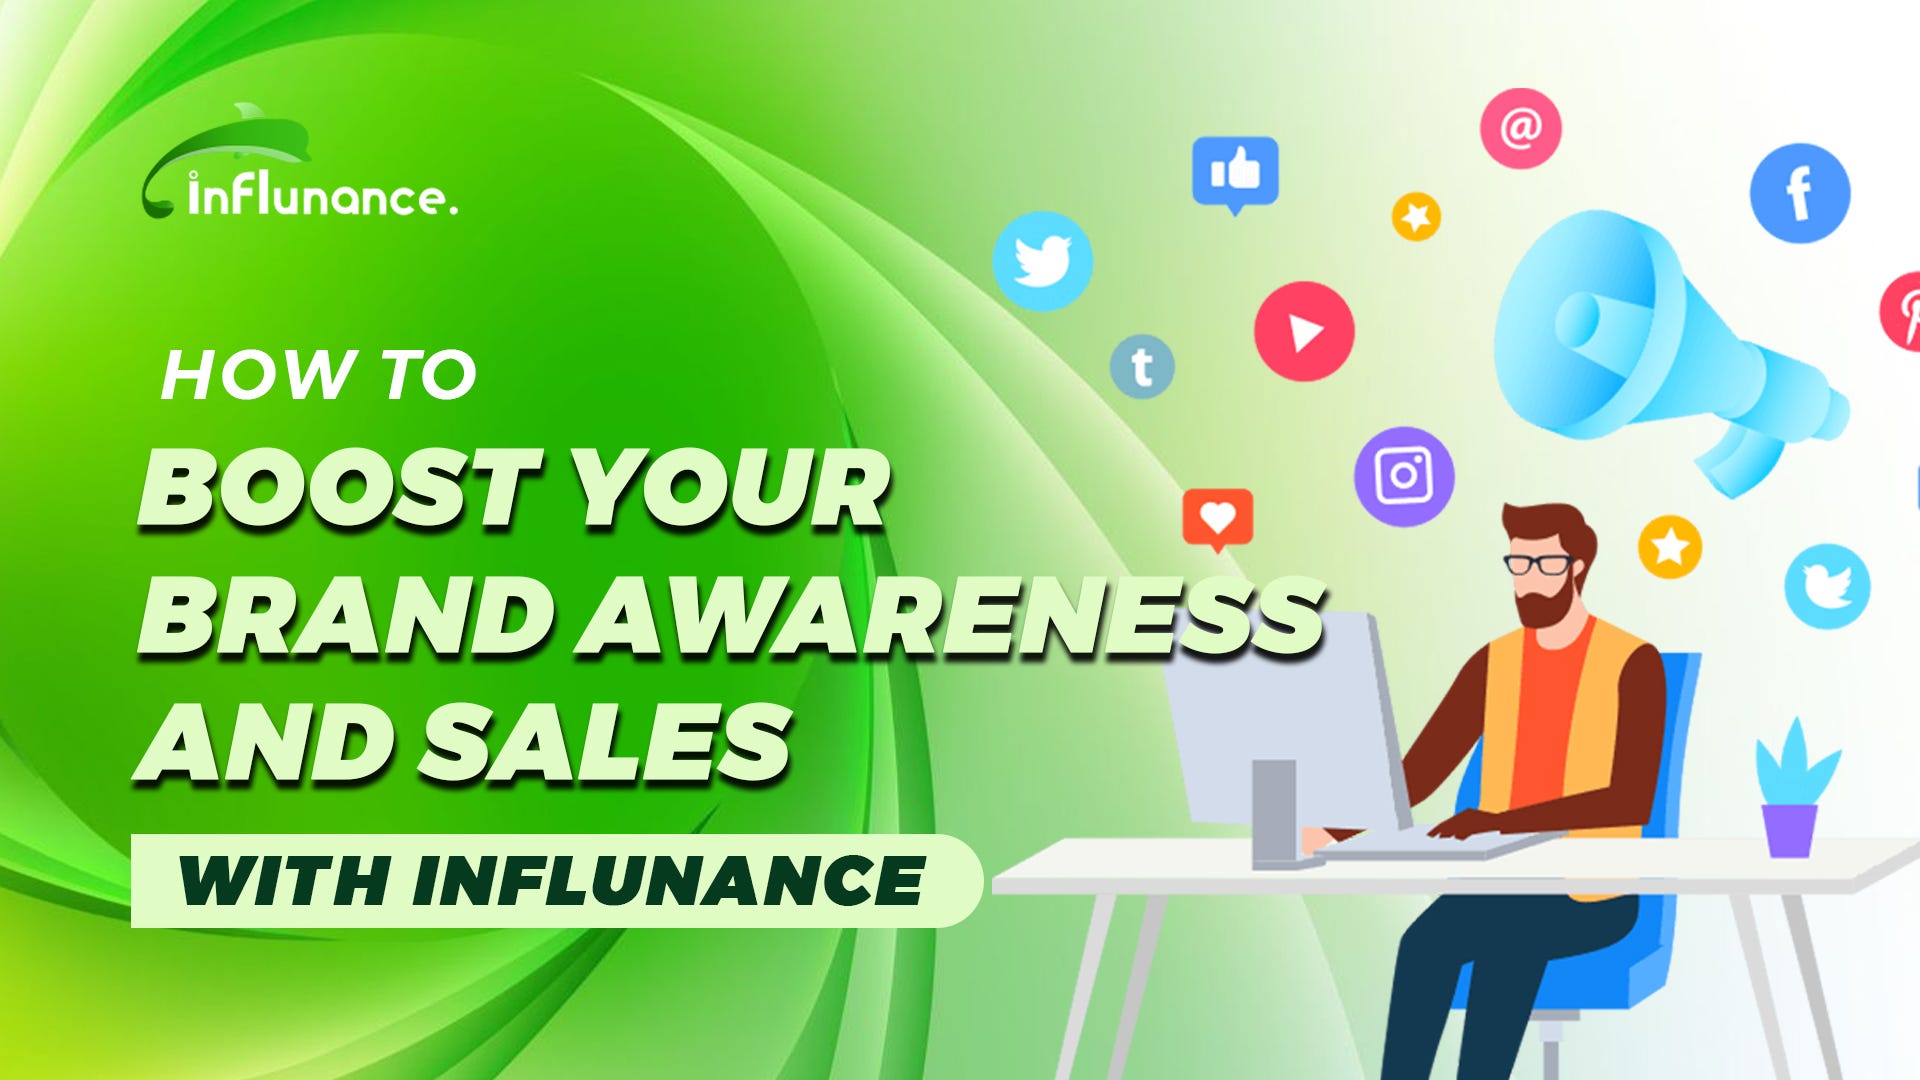 How to Boost Your Brand Awareness and Sales with Influnance